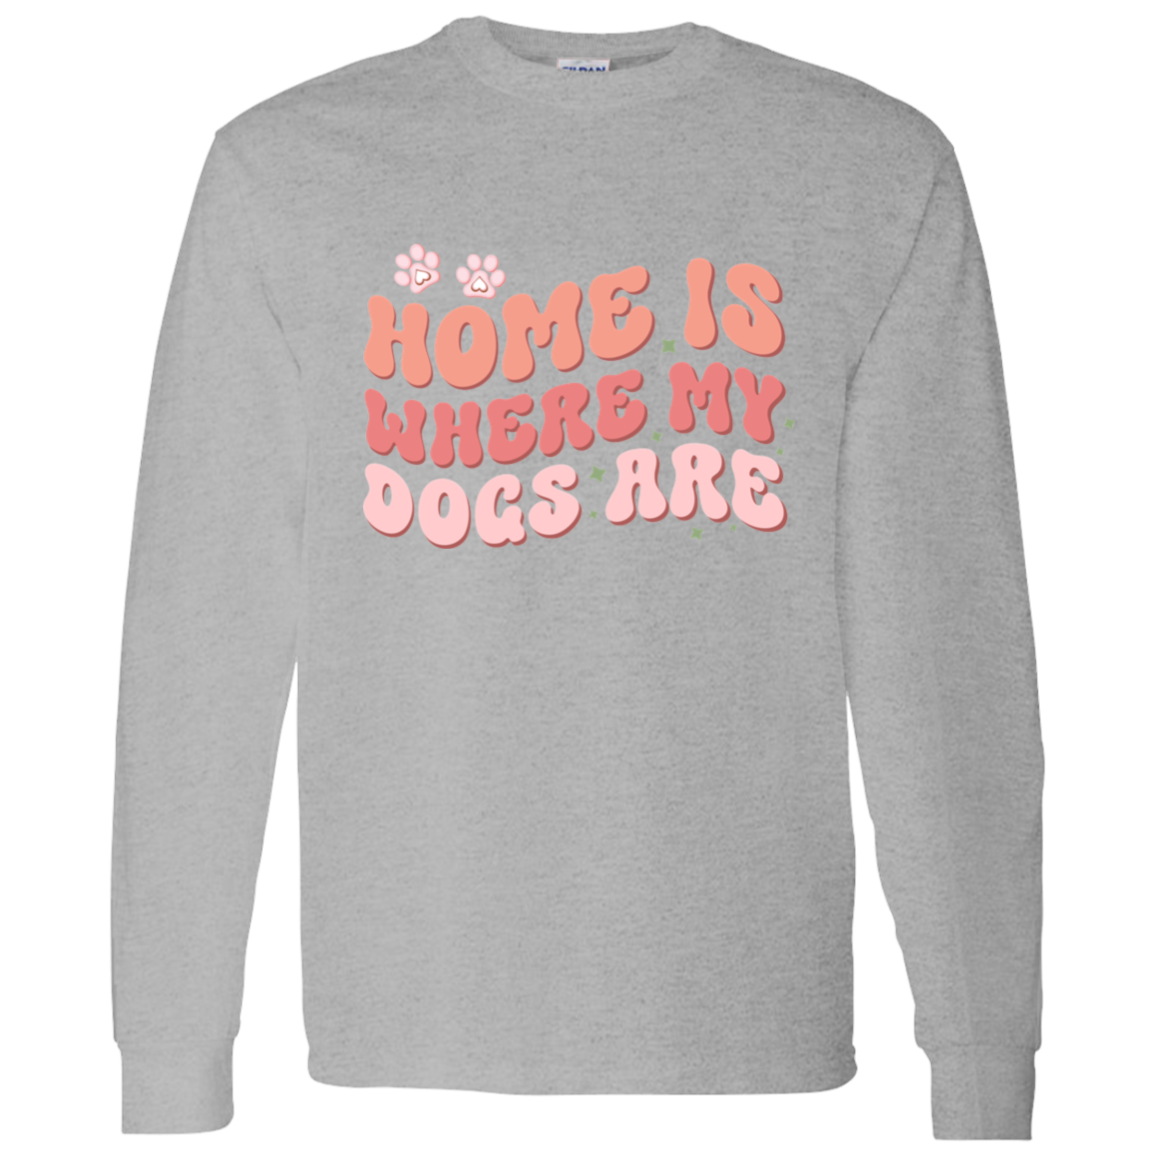 Home is Where My Dogs Are Long Sleeve T-Shirt